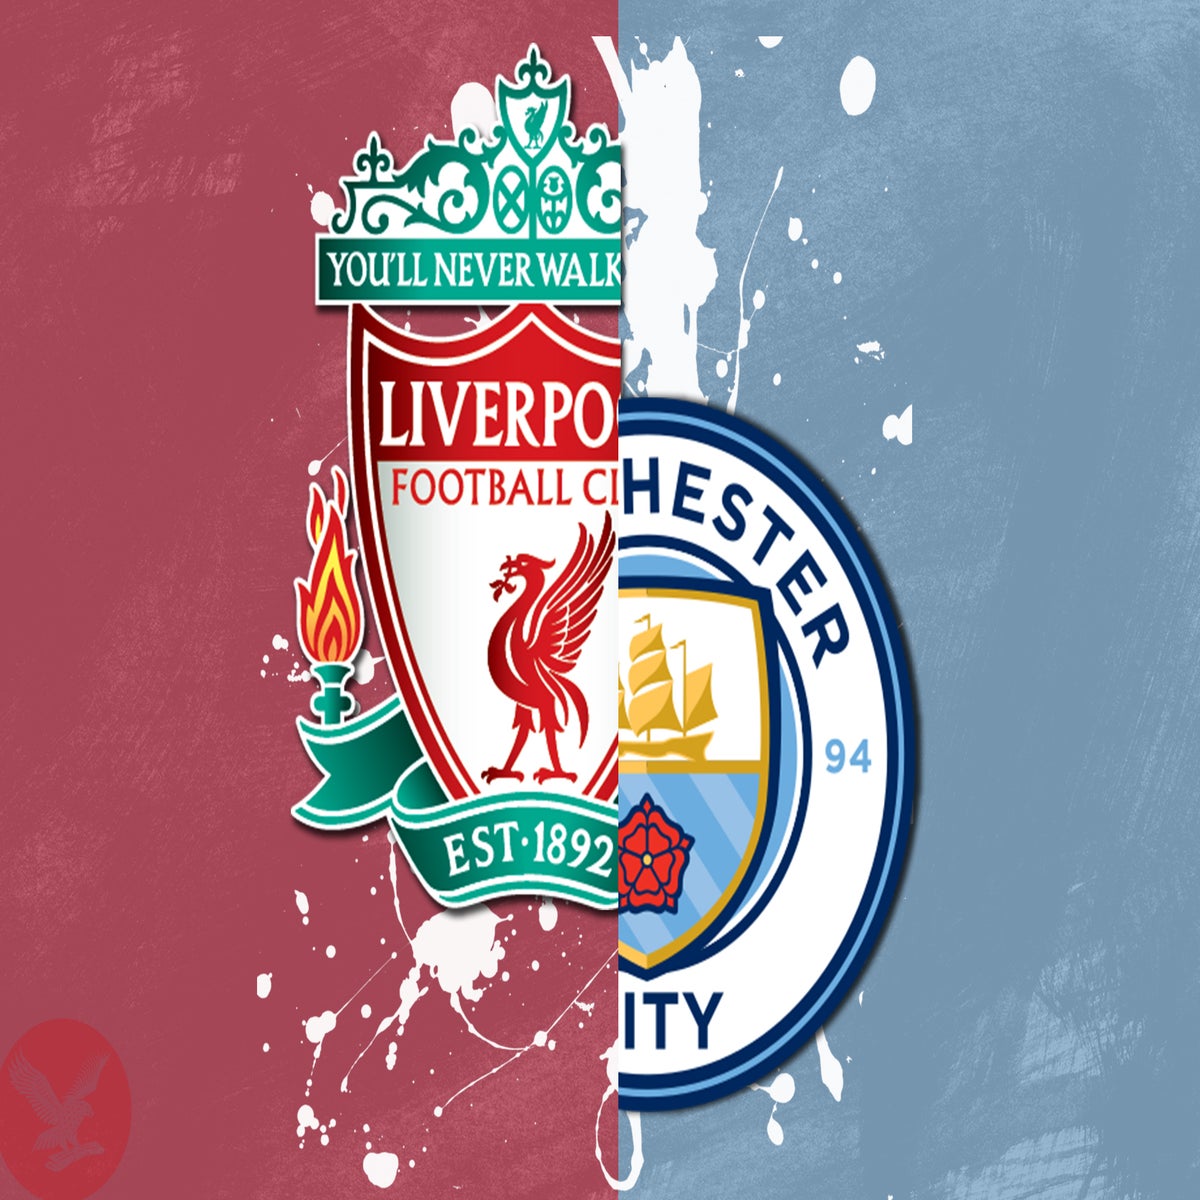 Six Key Areas That Will Decide Manchester City vs Liverpool